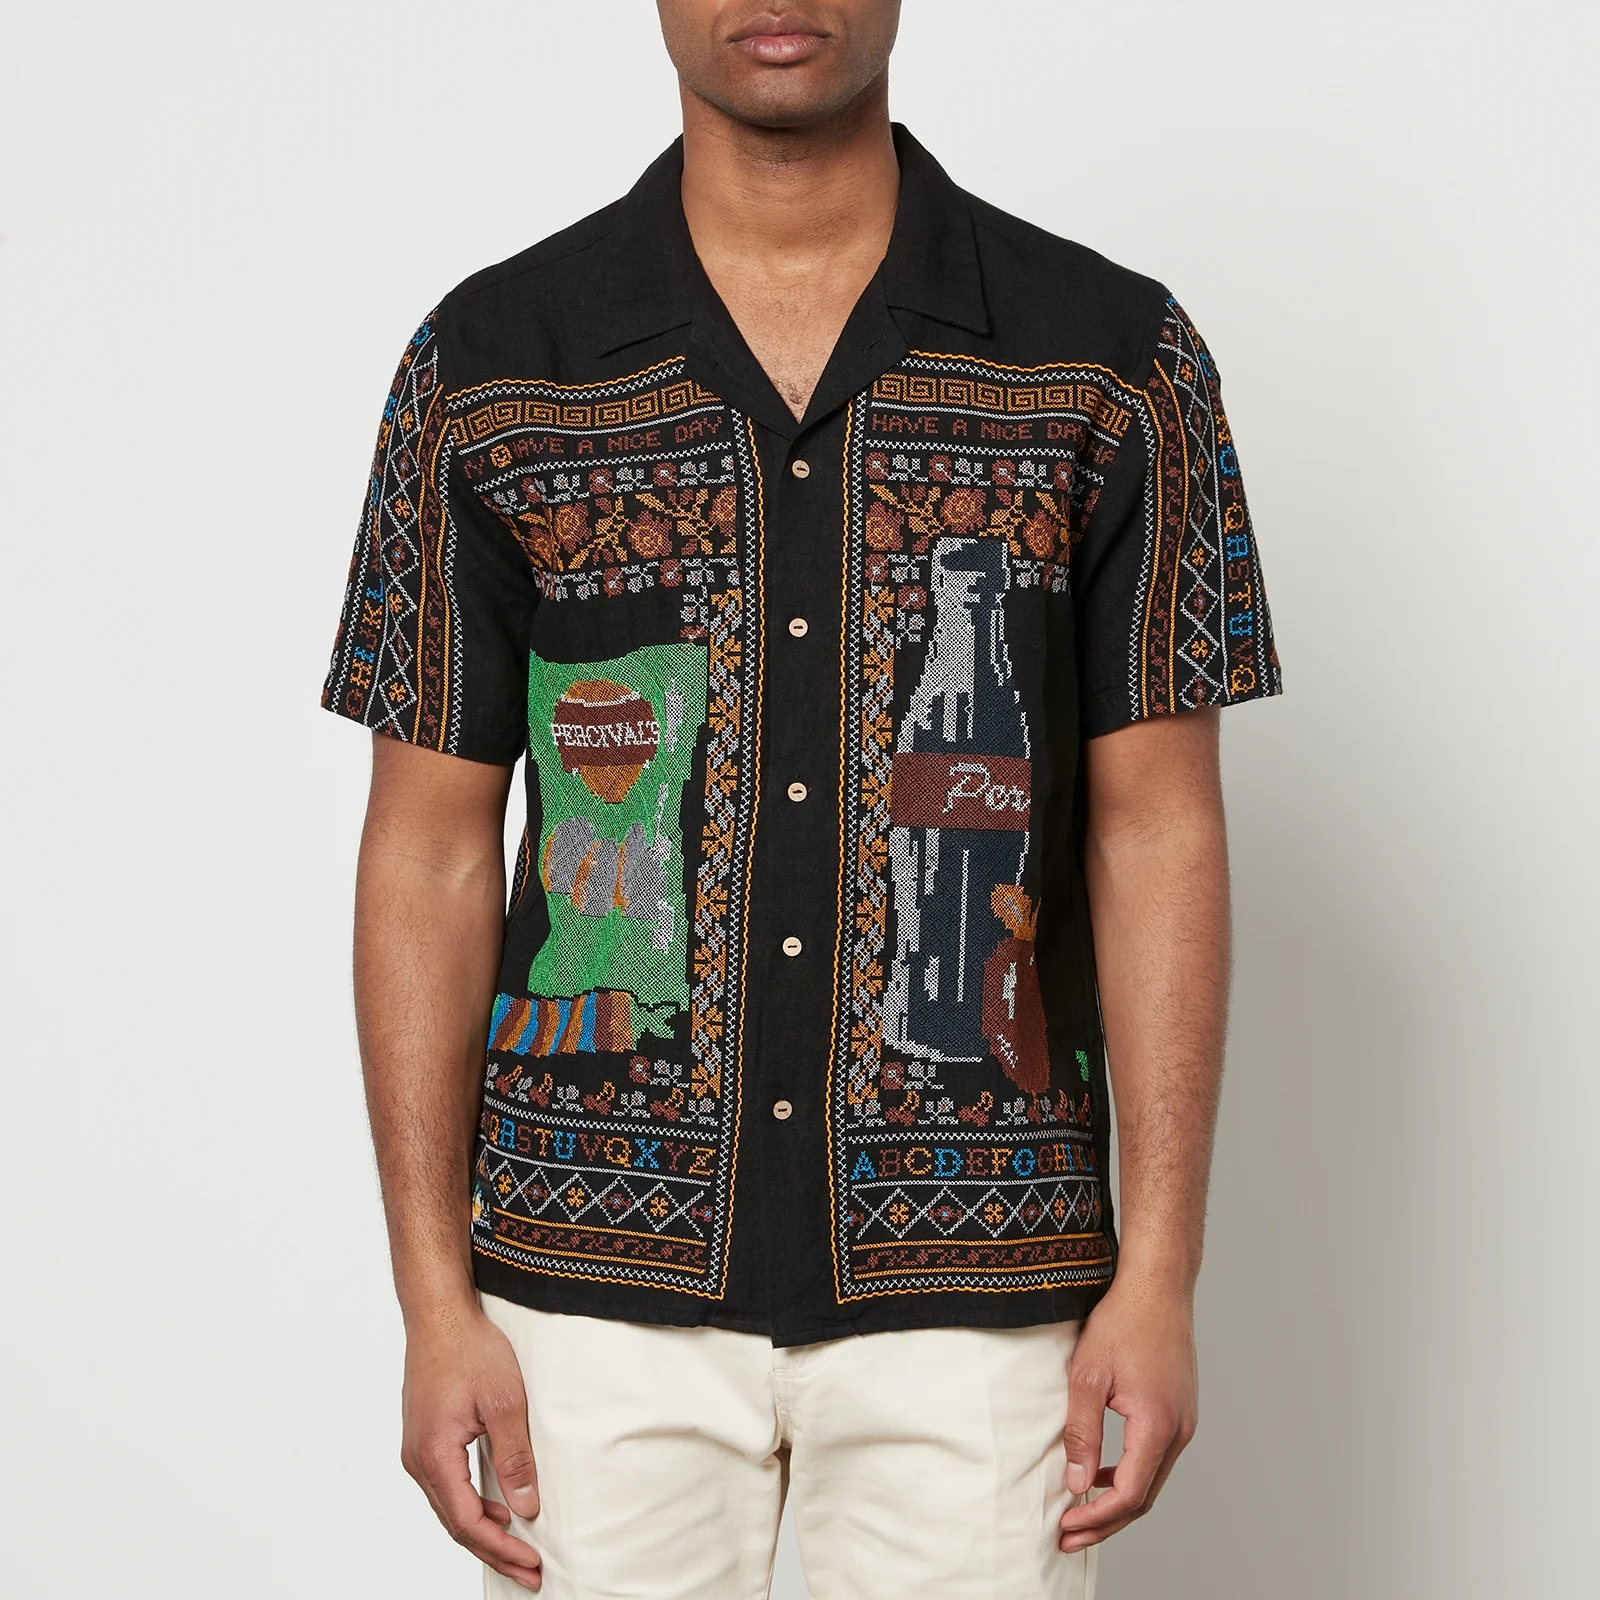 Percival Meal Deal Embroidered Linen Shirt Image 1